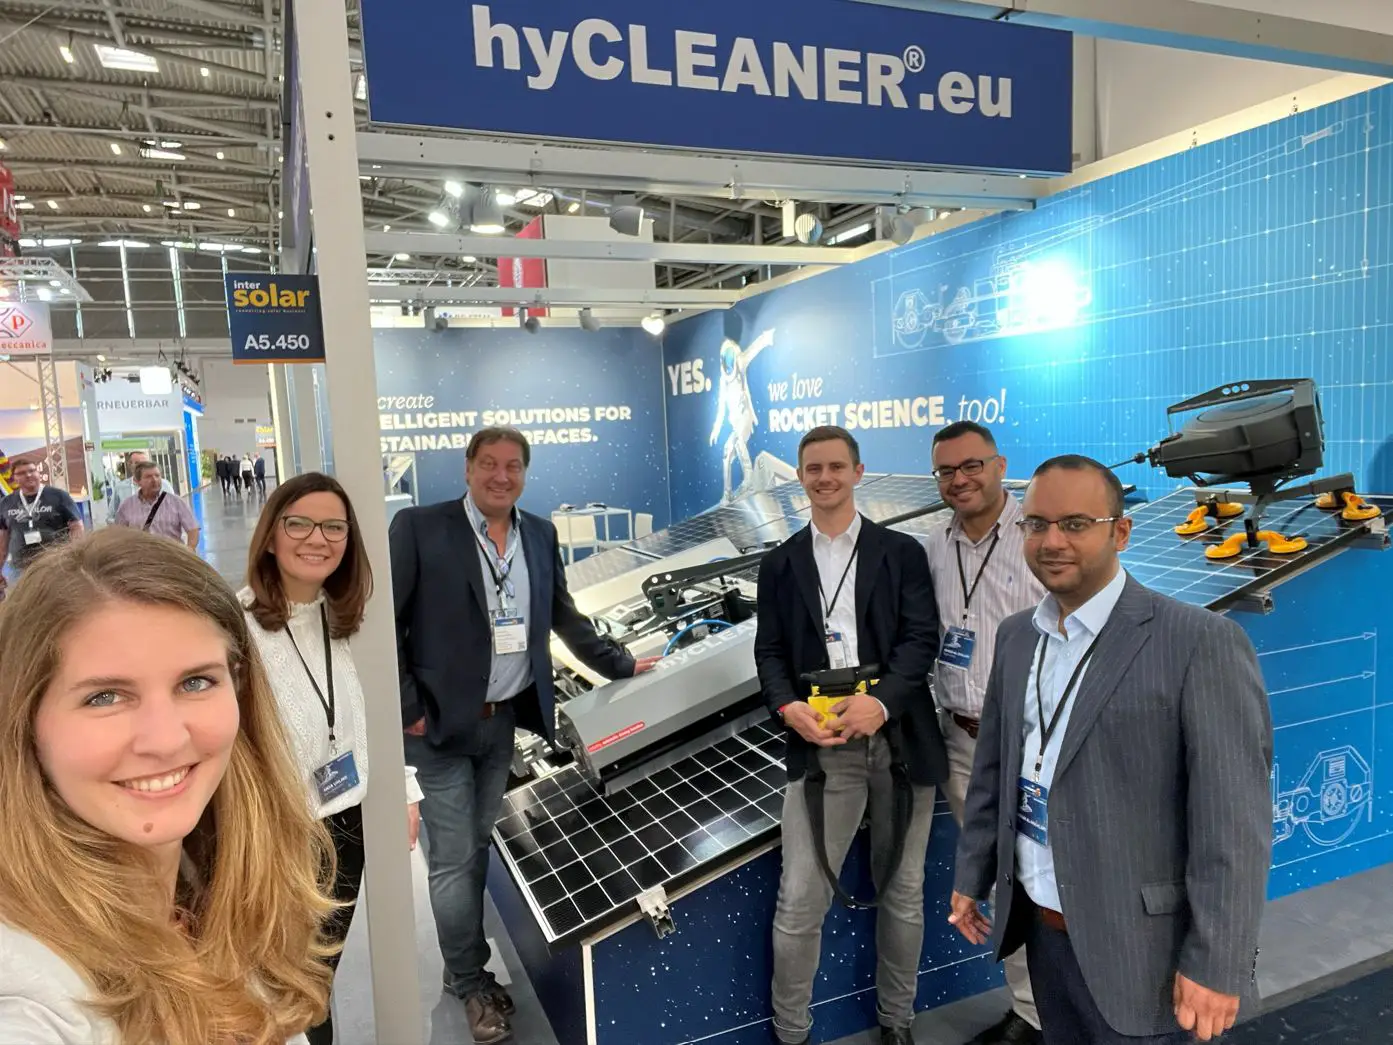 hyCLEANER Jobs join the crew and strengthen our team